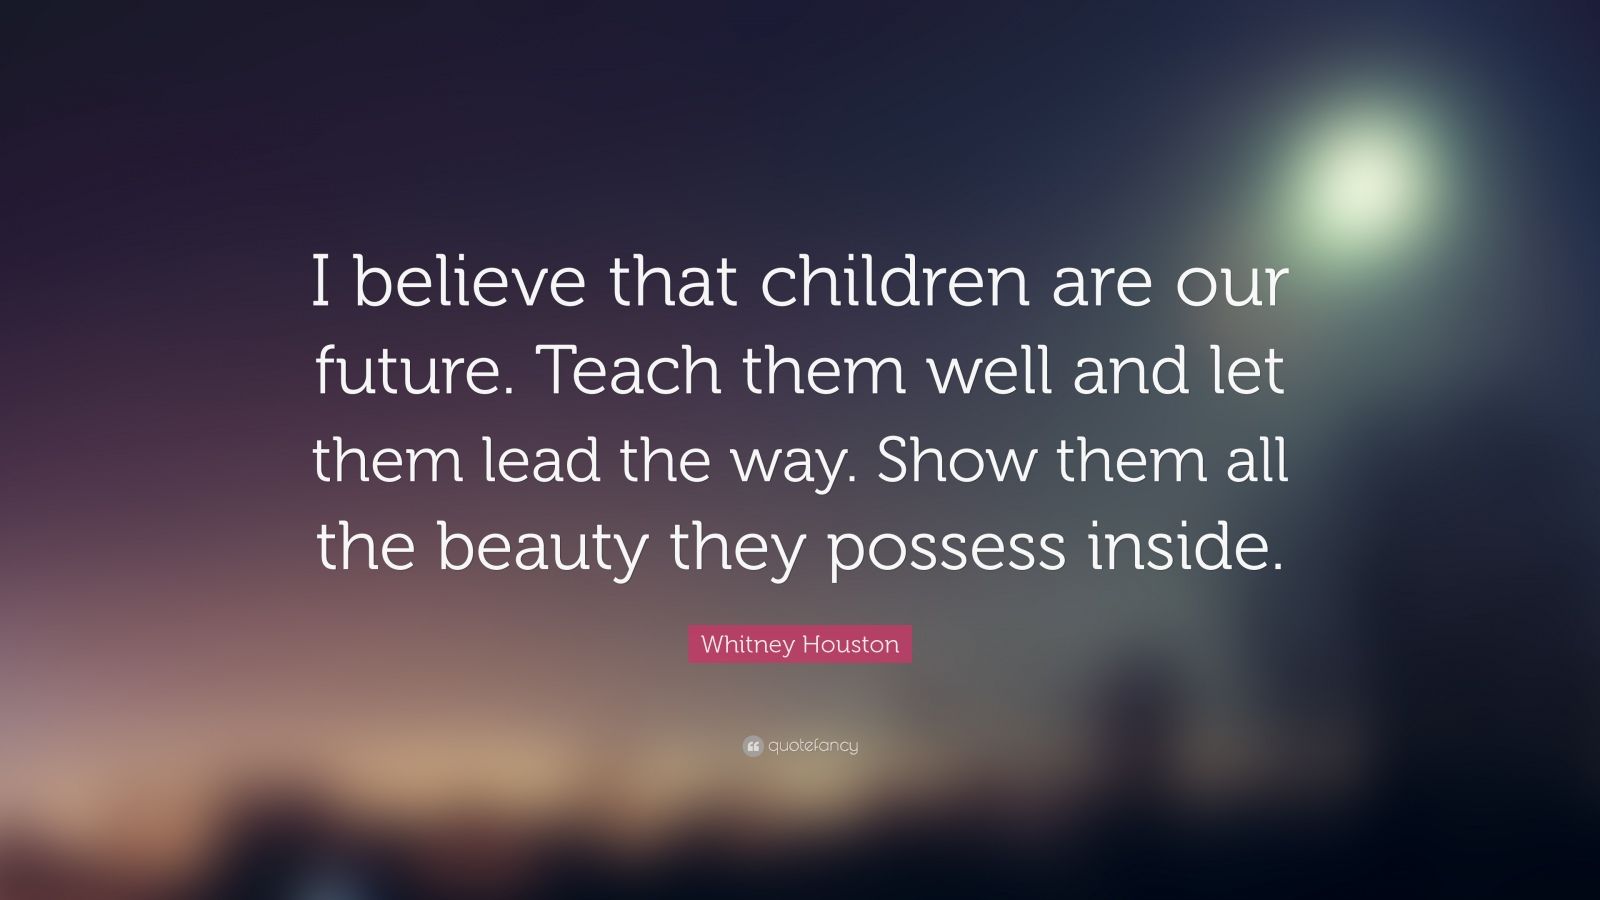 Whitney Houston Quote: “I believe that children are our future. Teach